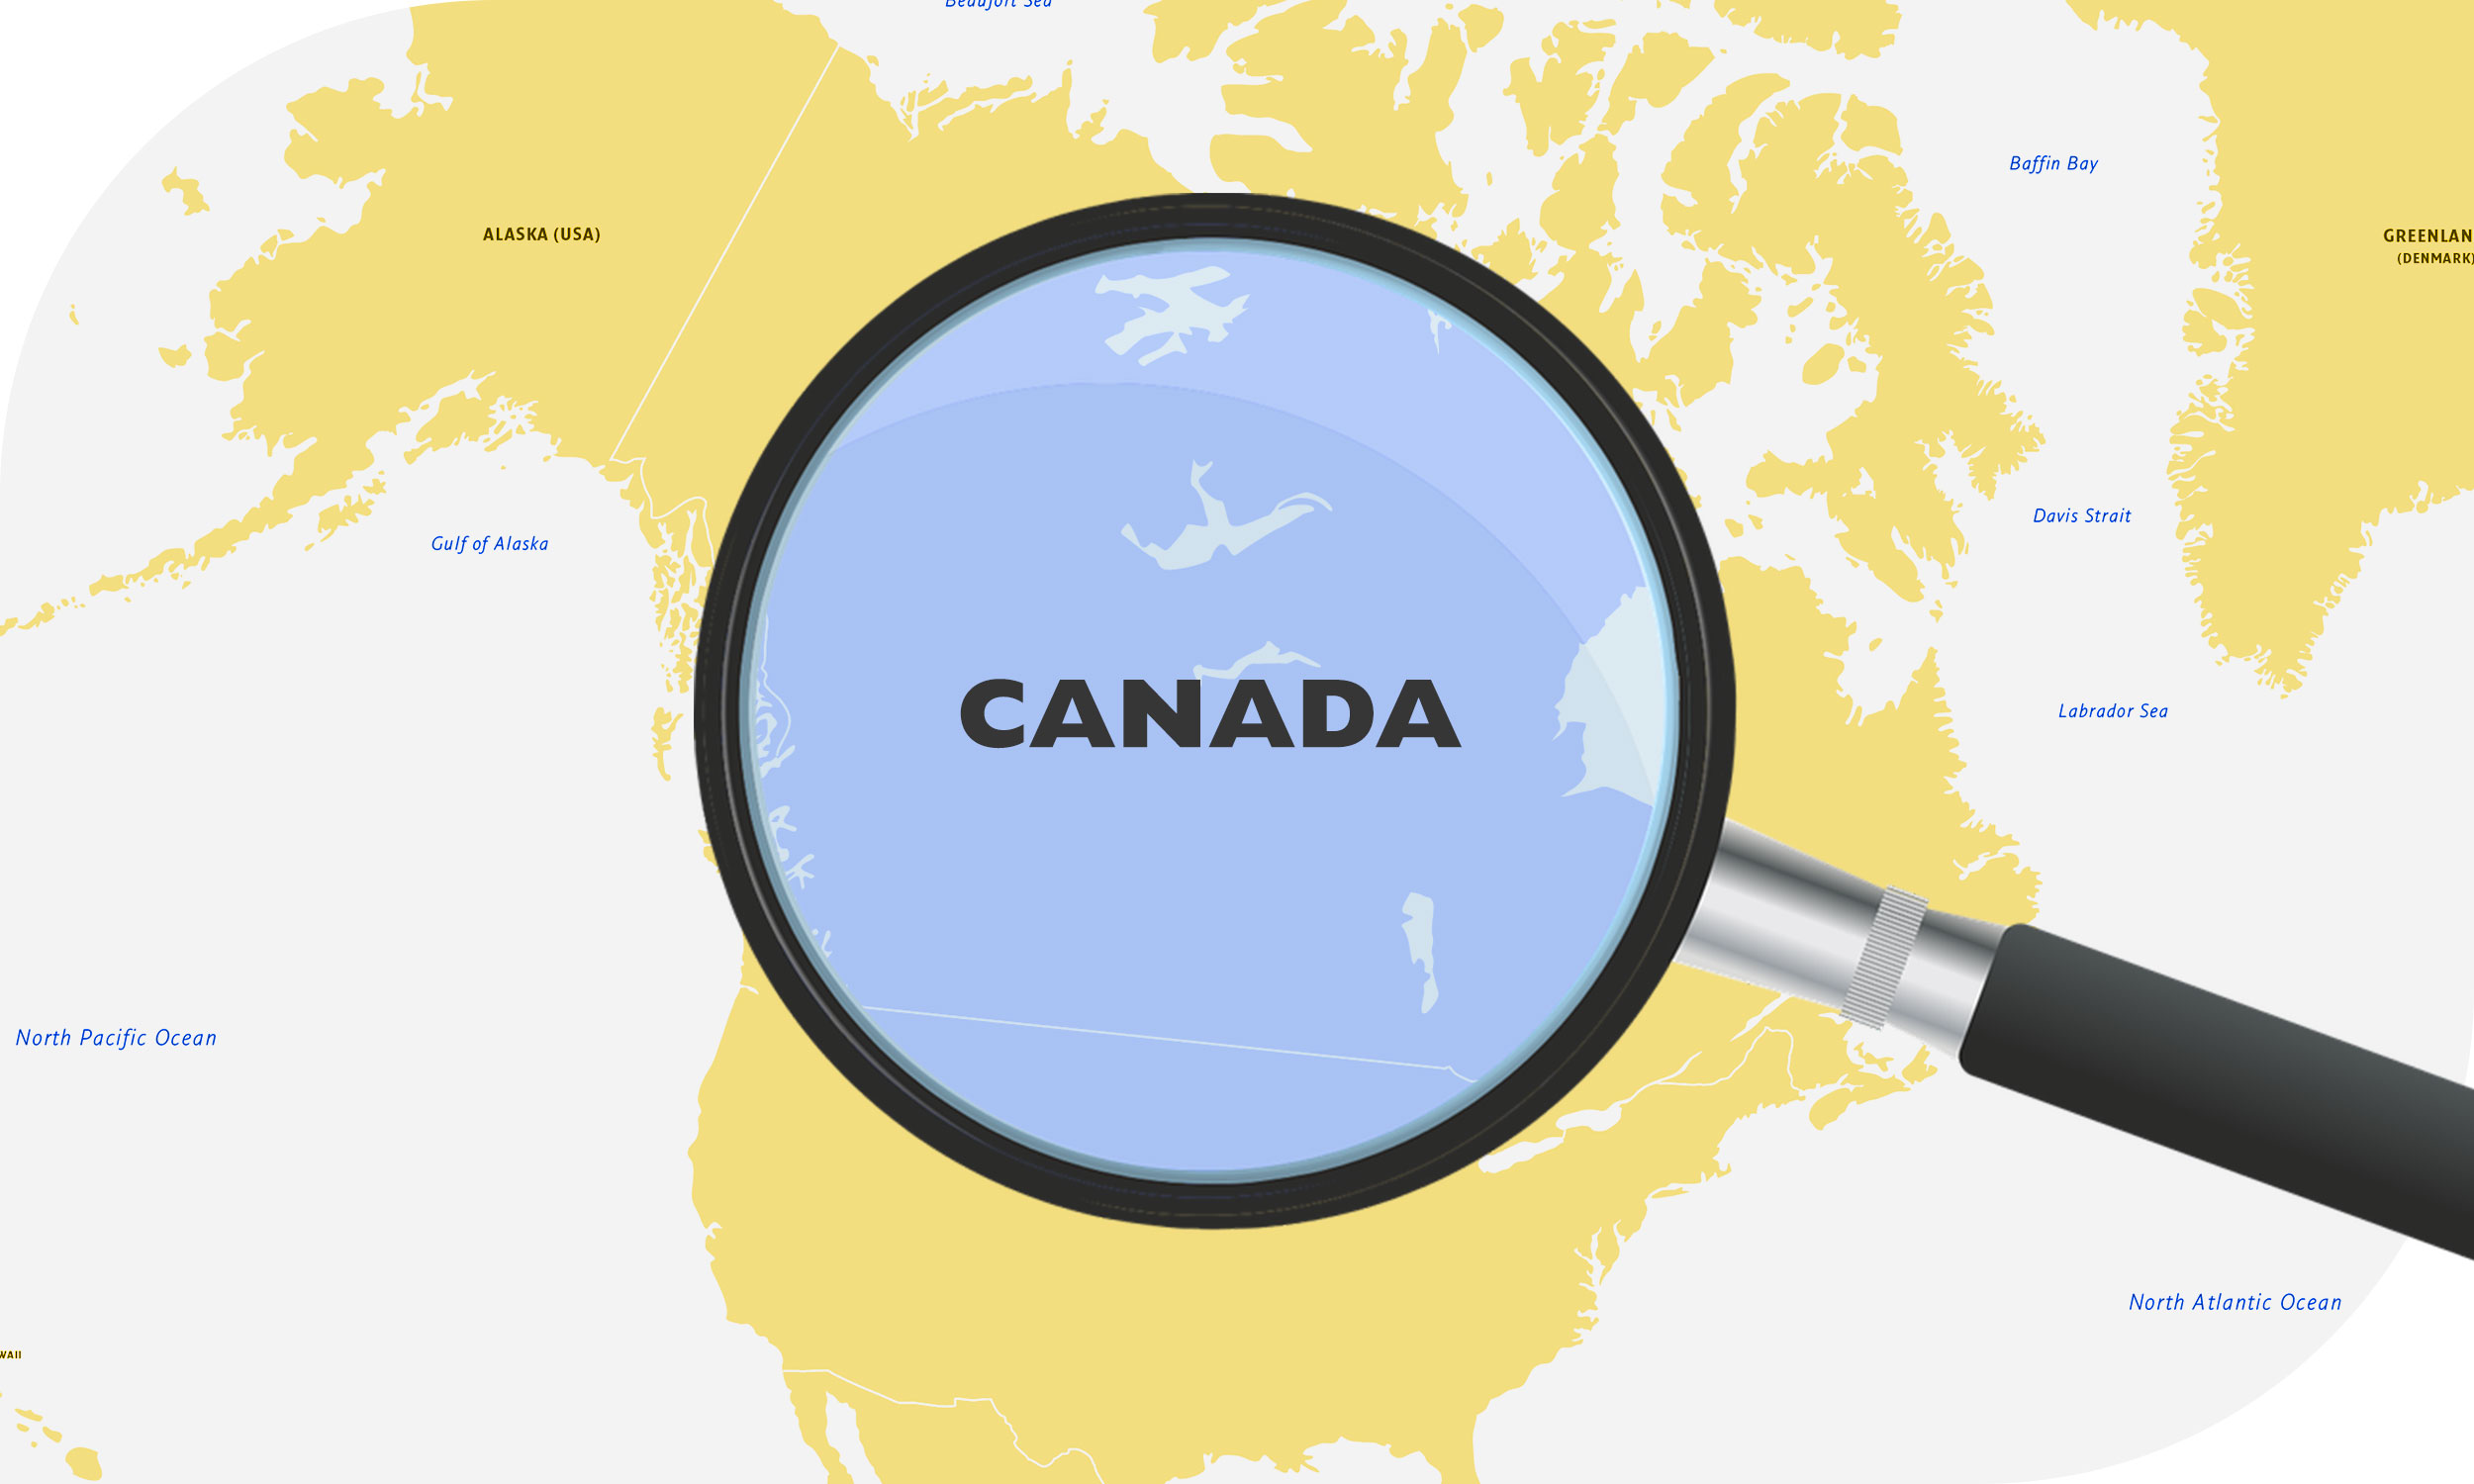 Map of North American shipping destinations zoomed in on Canada